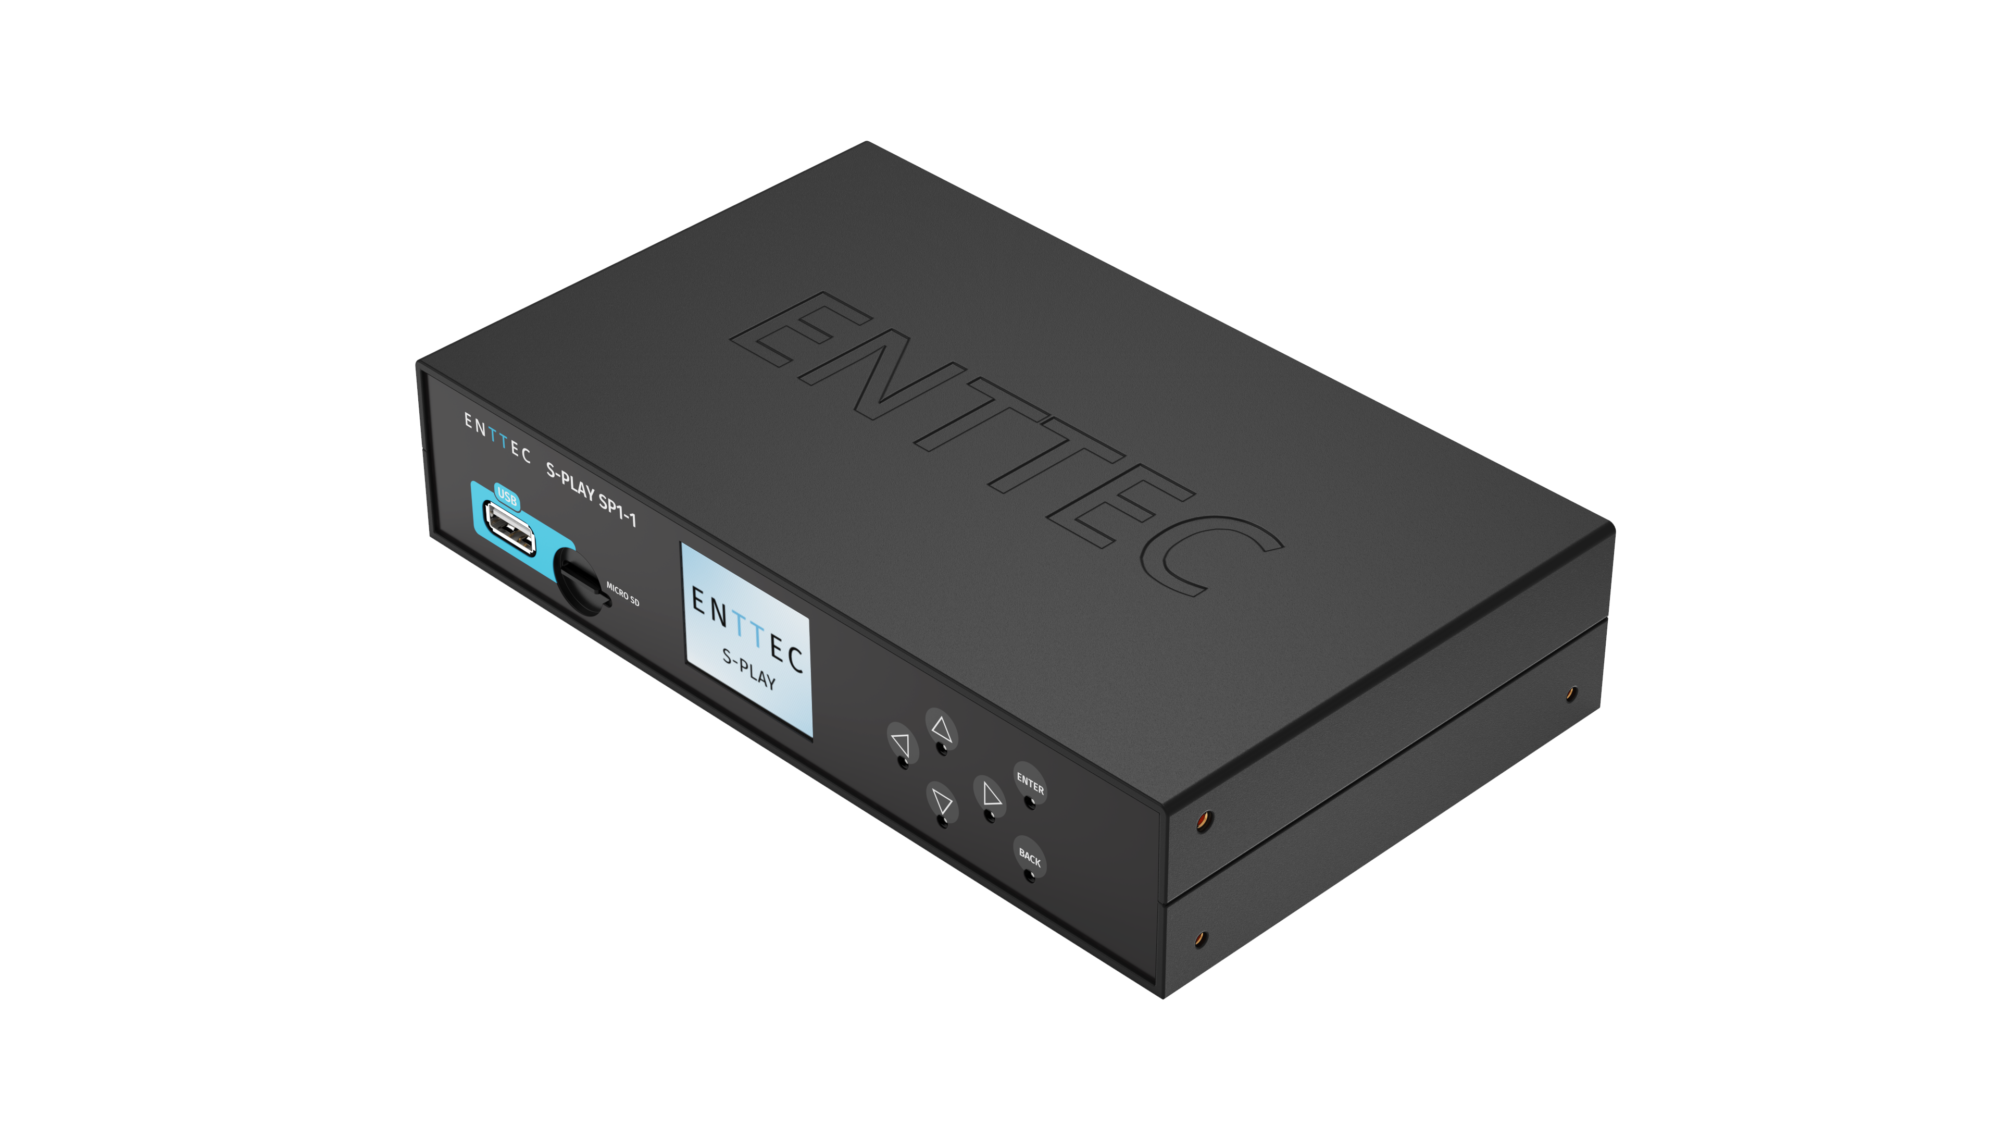 ENTTEC S-Play DMX, ArtNet and sACN lighting controller with show creation and record functionality.